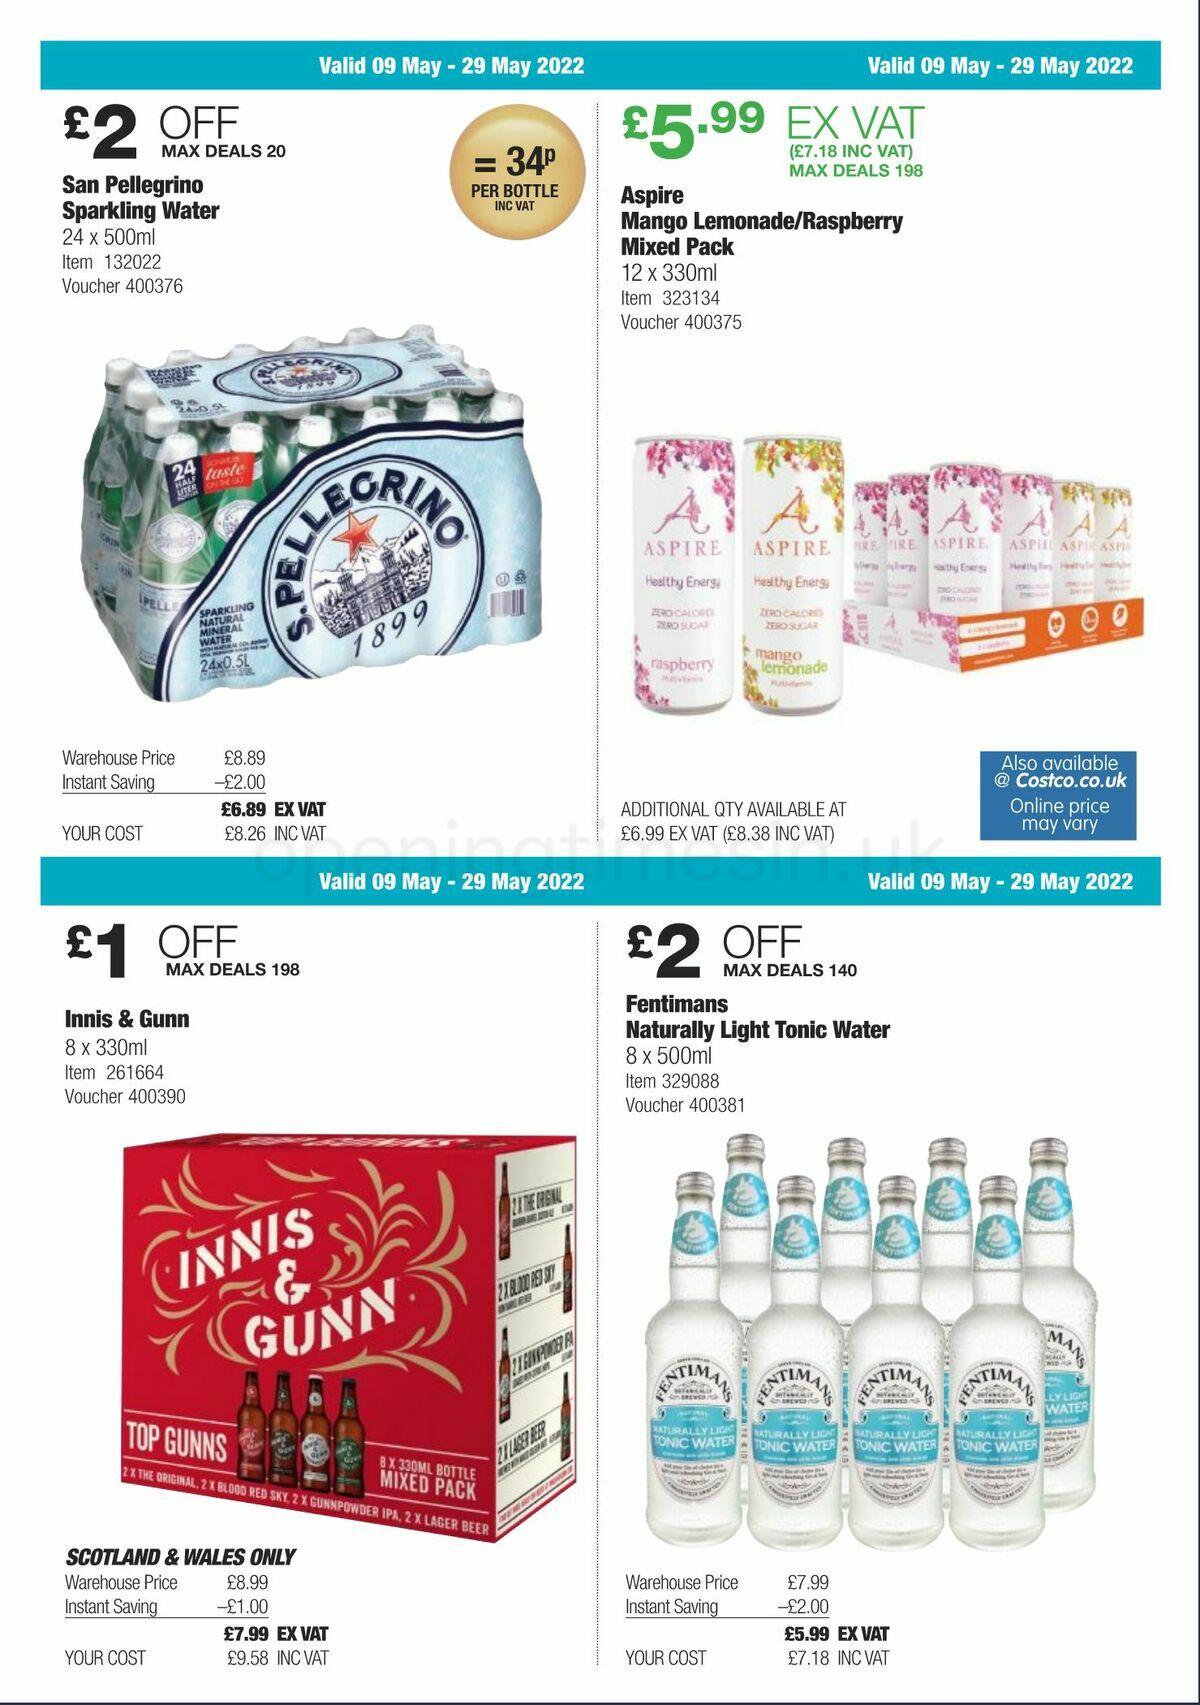 Costco Scotland & Wales Offers from 9 May